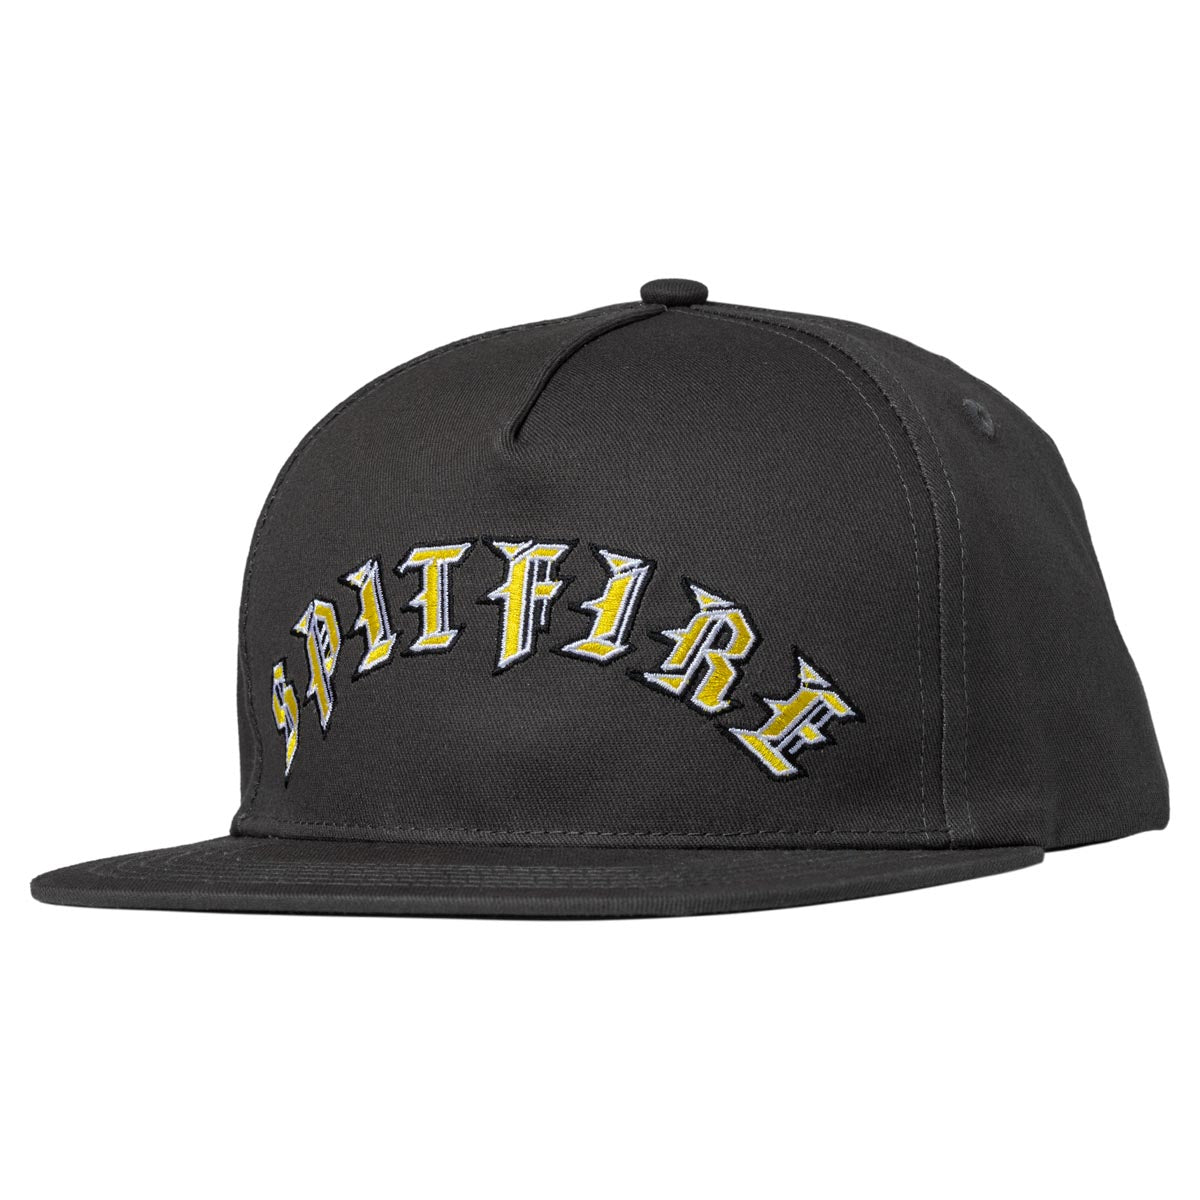 Spitfire Old E Arch Snapback Hat - Charcoal/Yellow image 1